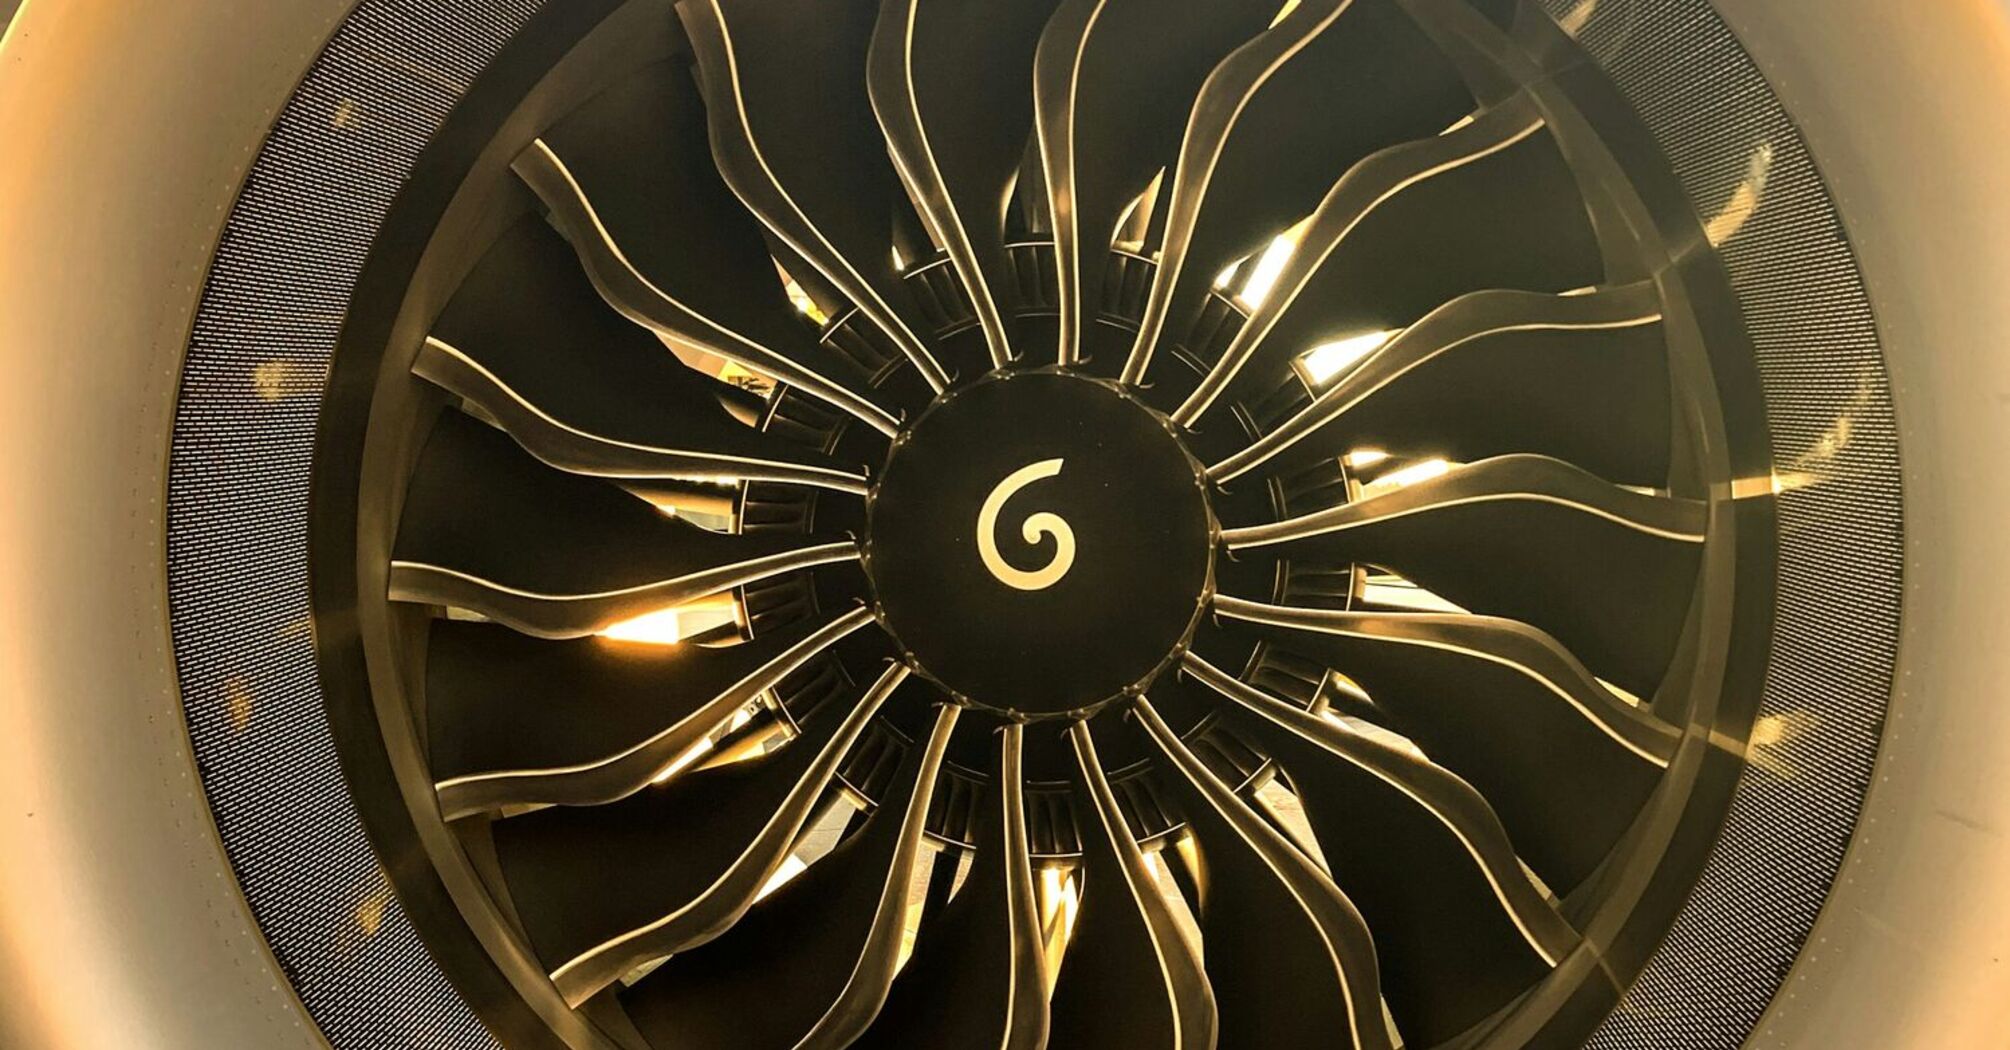 Close-up of a jet engine with distinctive fan blades and a central spinner on a tarmac at sunset 